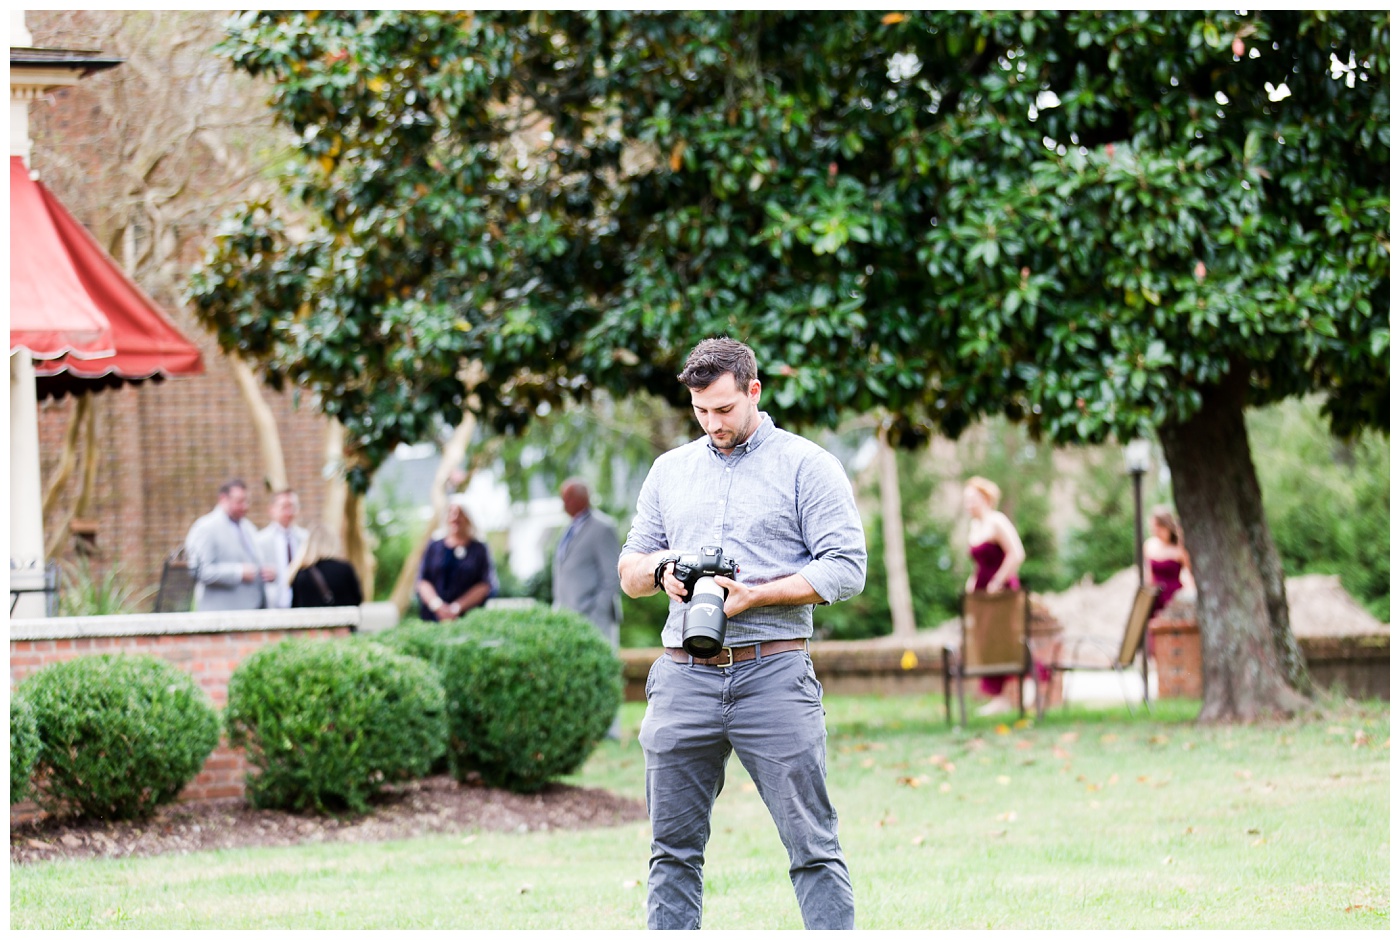 Leigh Skaggs Photography | Behind the Scenes: Assistants